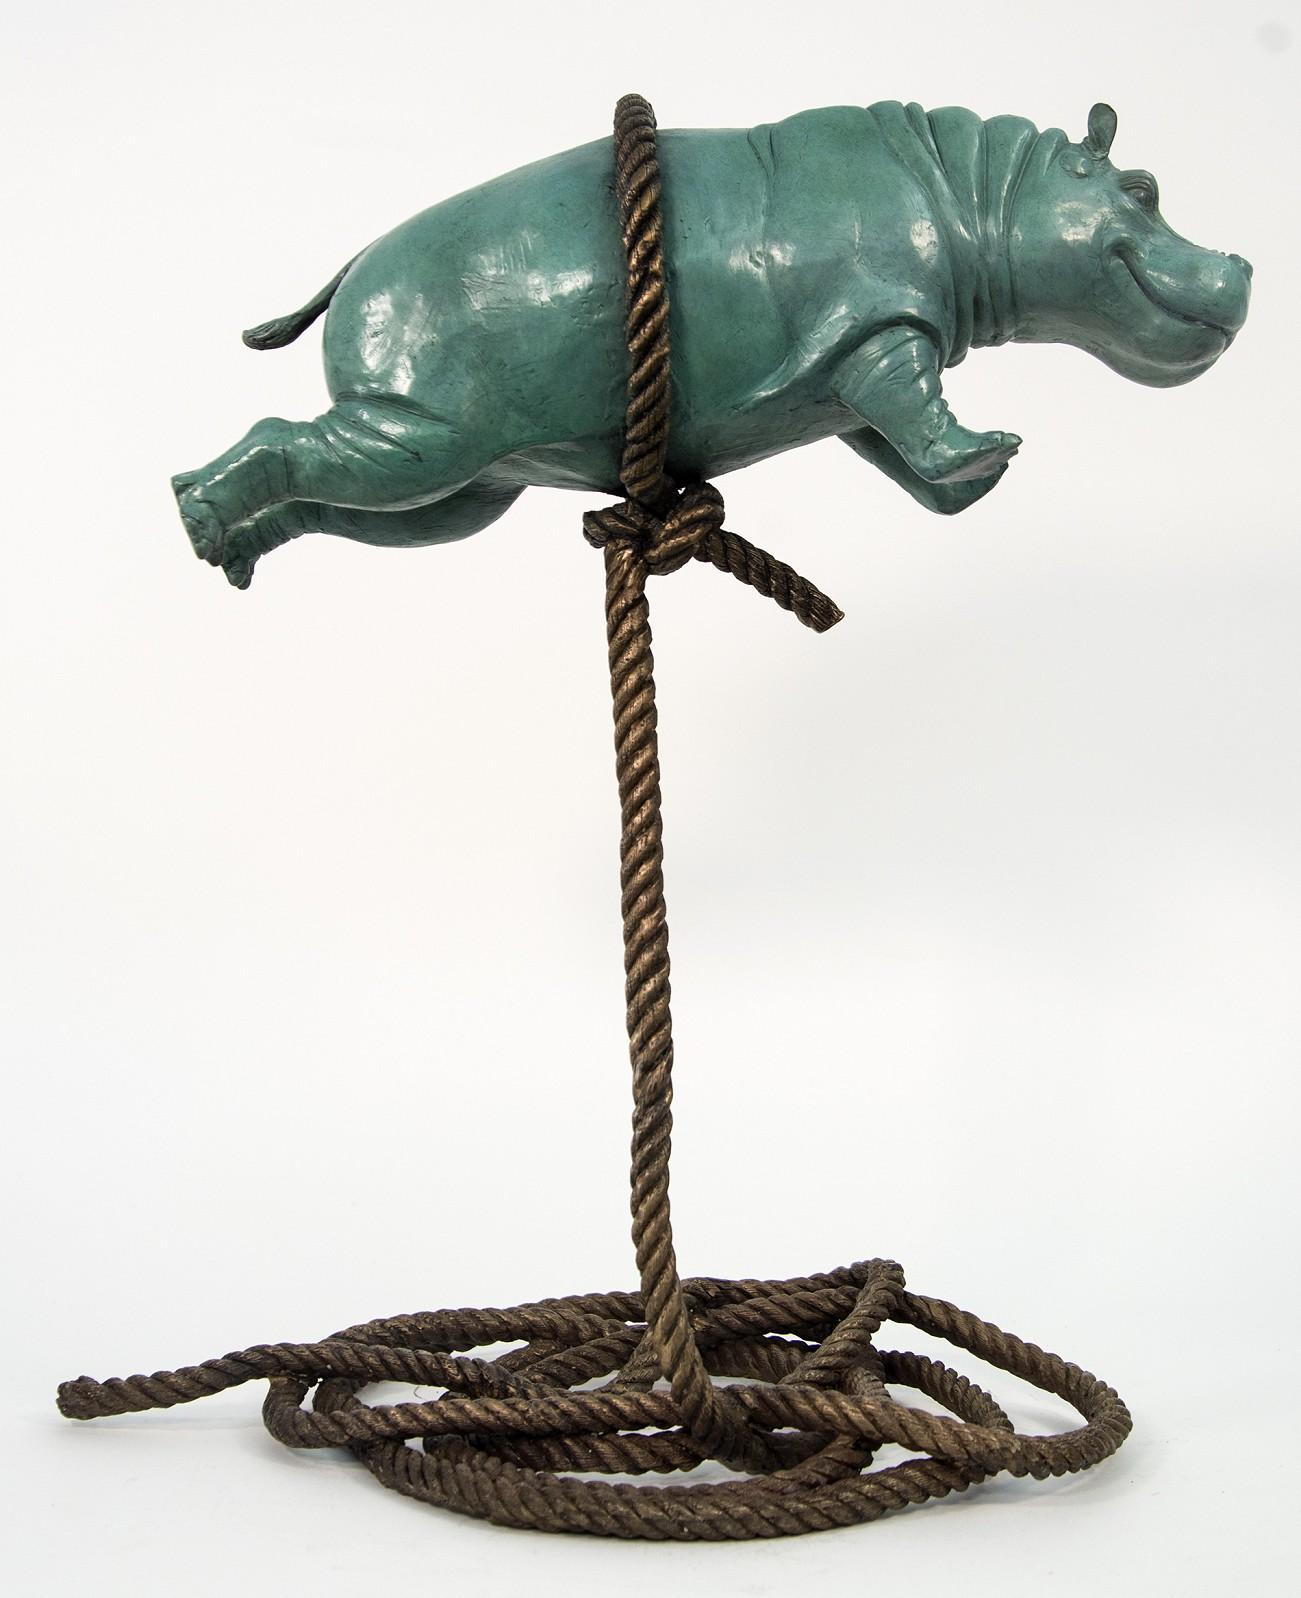 Green Flying Hippo Ed. 7/8 - figurative, playful, contemporary bronze sculpture - Sculpture by Gillie and Marc Schattner